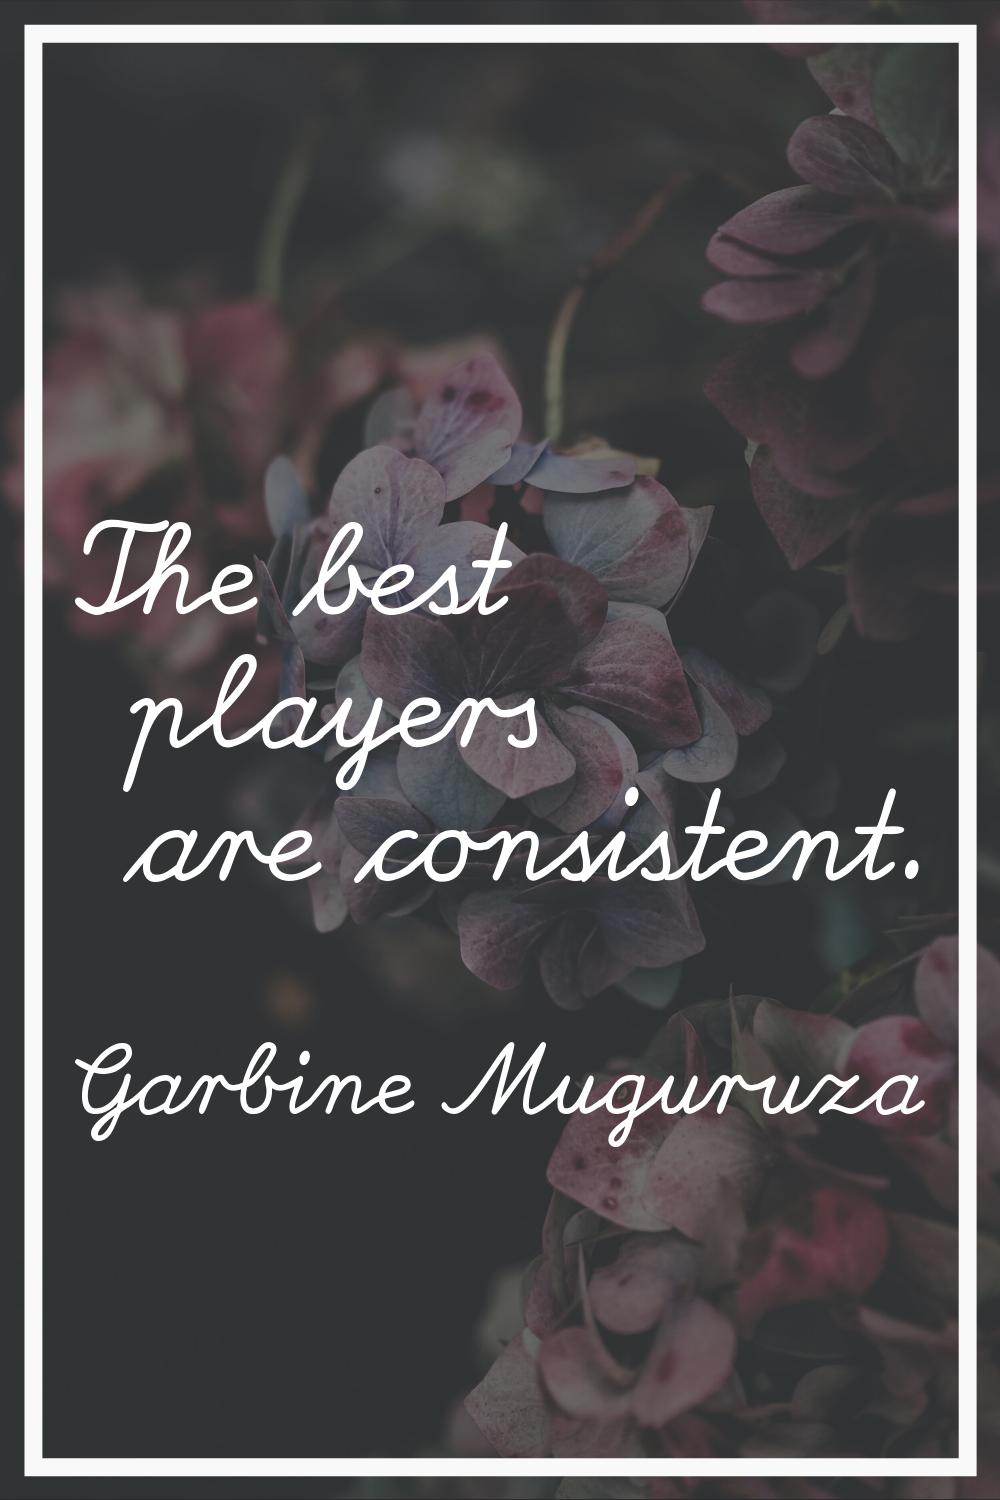 The best players are consistent.